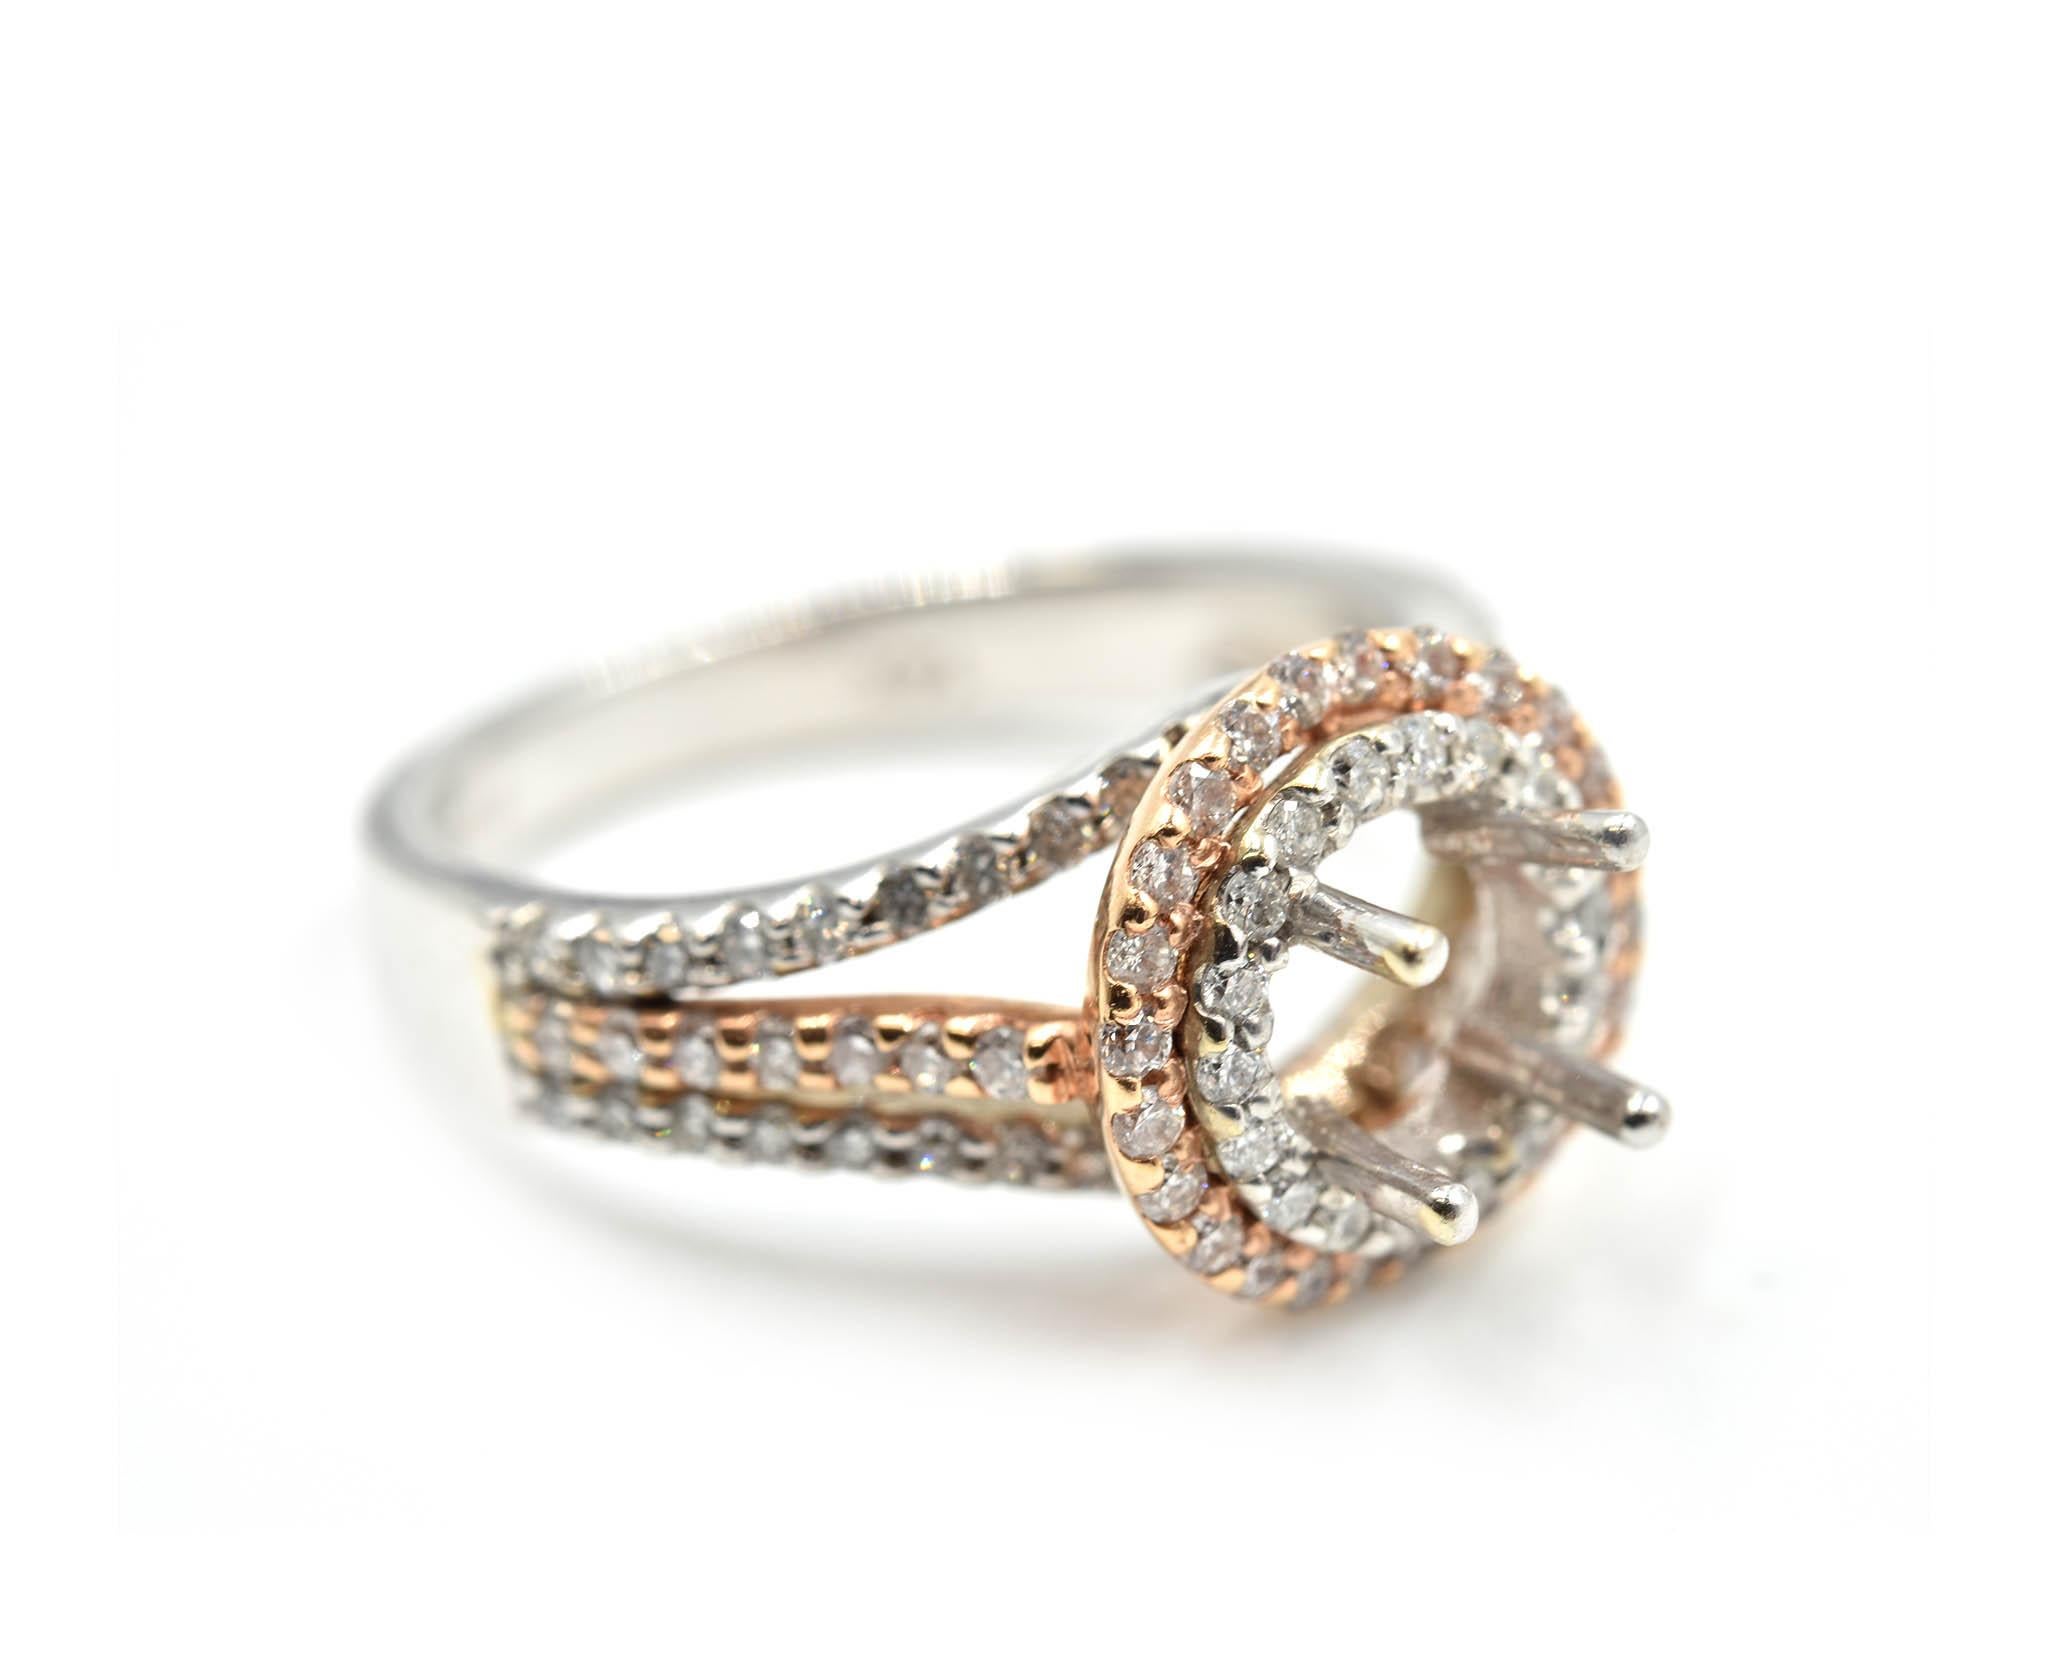 Designer: custom design
Material: 14k white & rose gold
Diamonds: round brilliant cut diamonds = 0.67carat total weight
Color: G-H
Clarity: SI1
Ring Size: 6 1/4 (please allow two additional shipping days for sizing requests)
Weight: 4.7 grams
